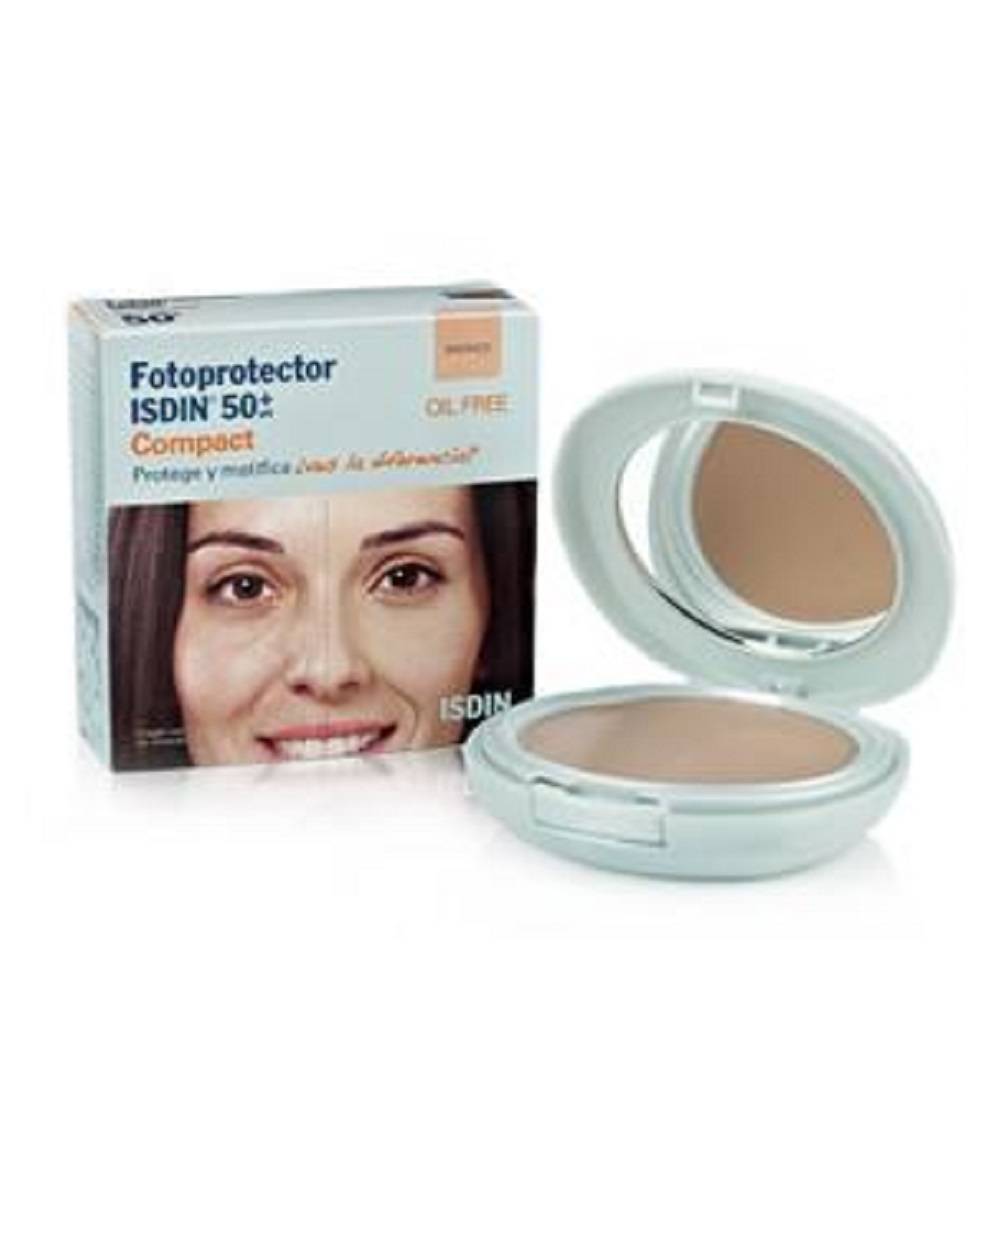 Fotoprotector ISDIN Compact - Bronce - Oil free - 10 g